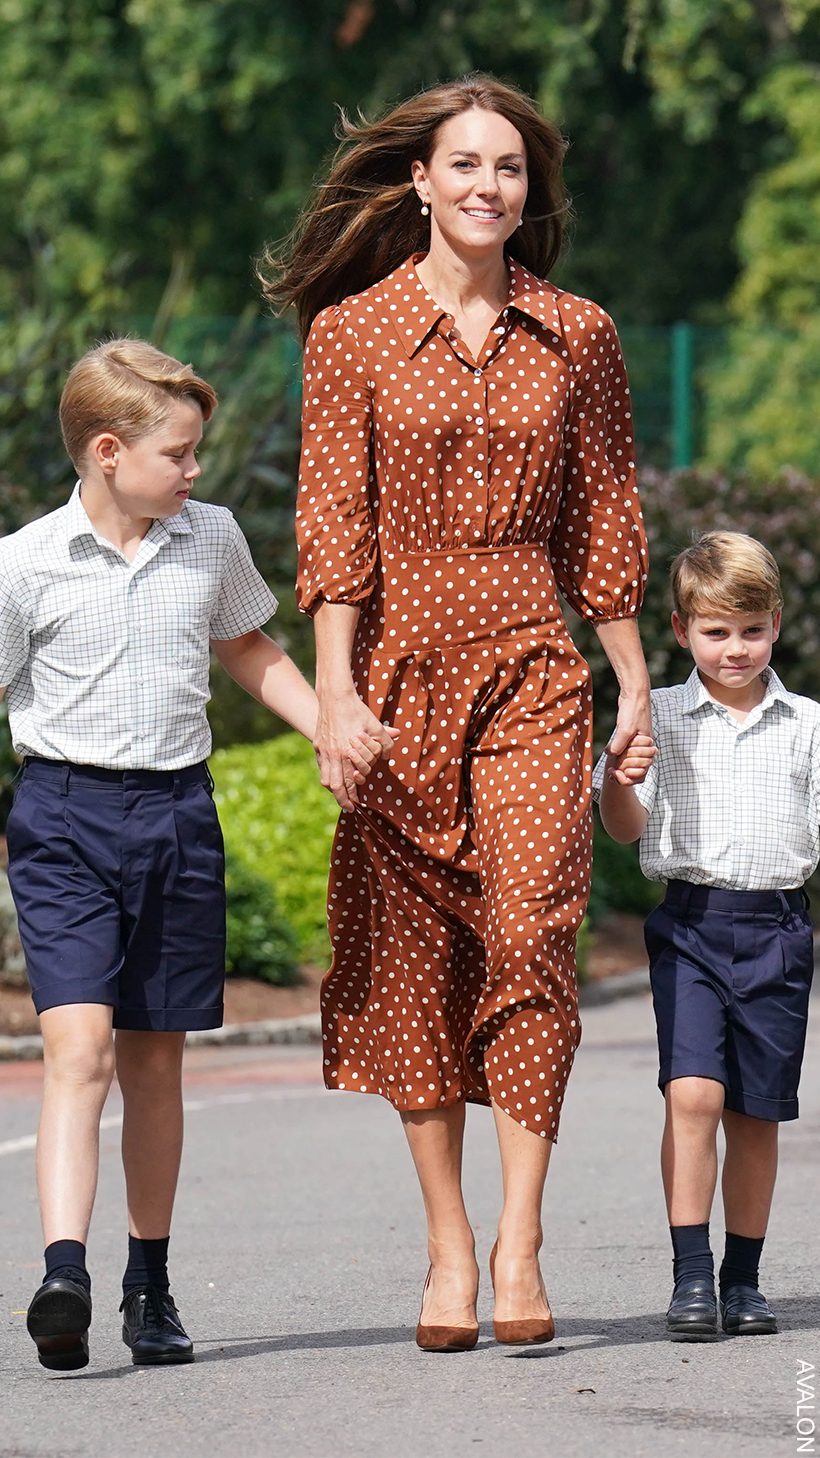 Kate Middleton on the school run wearing a rust brown dress with polka dots, that hits just below the knee.  